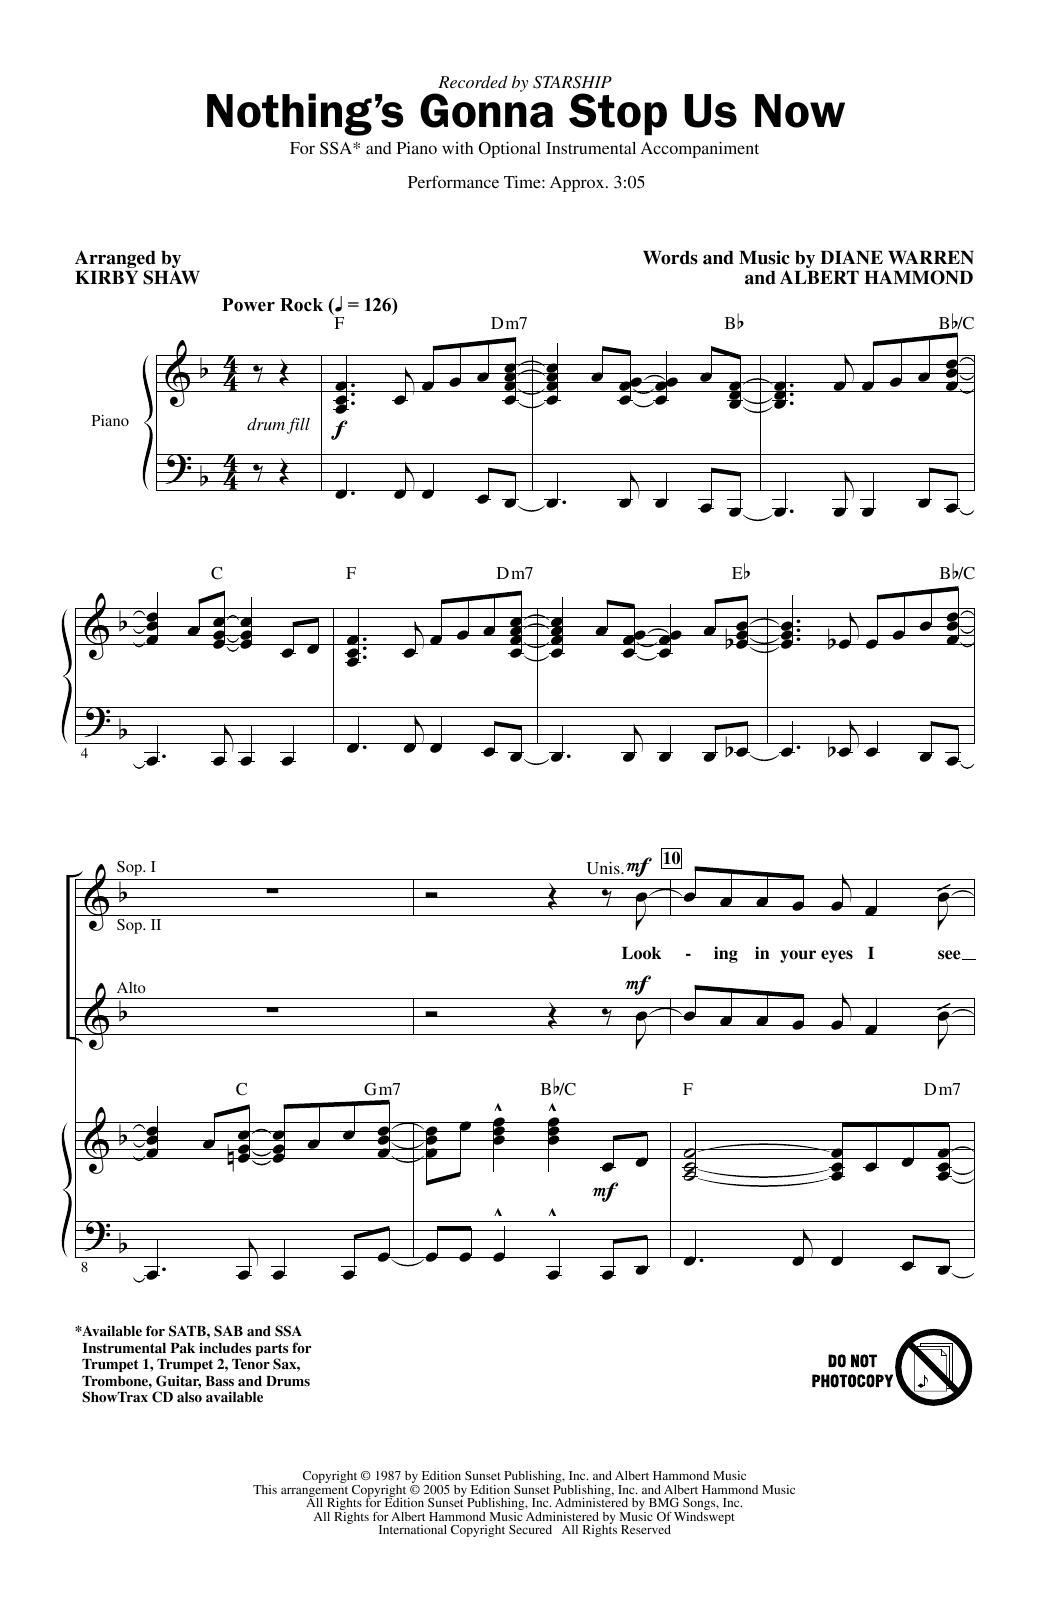 Download Starship Nothing's Gonna Stop Us Now (arr. Kirby Sheet Music